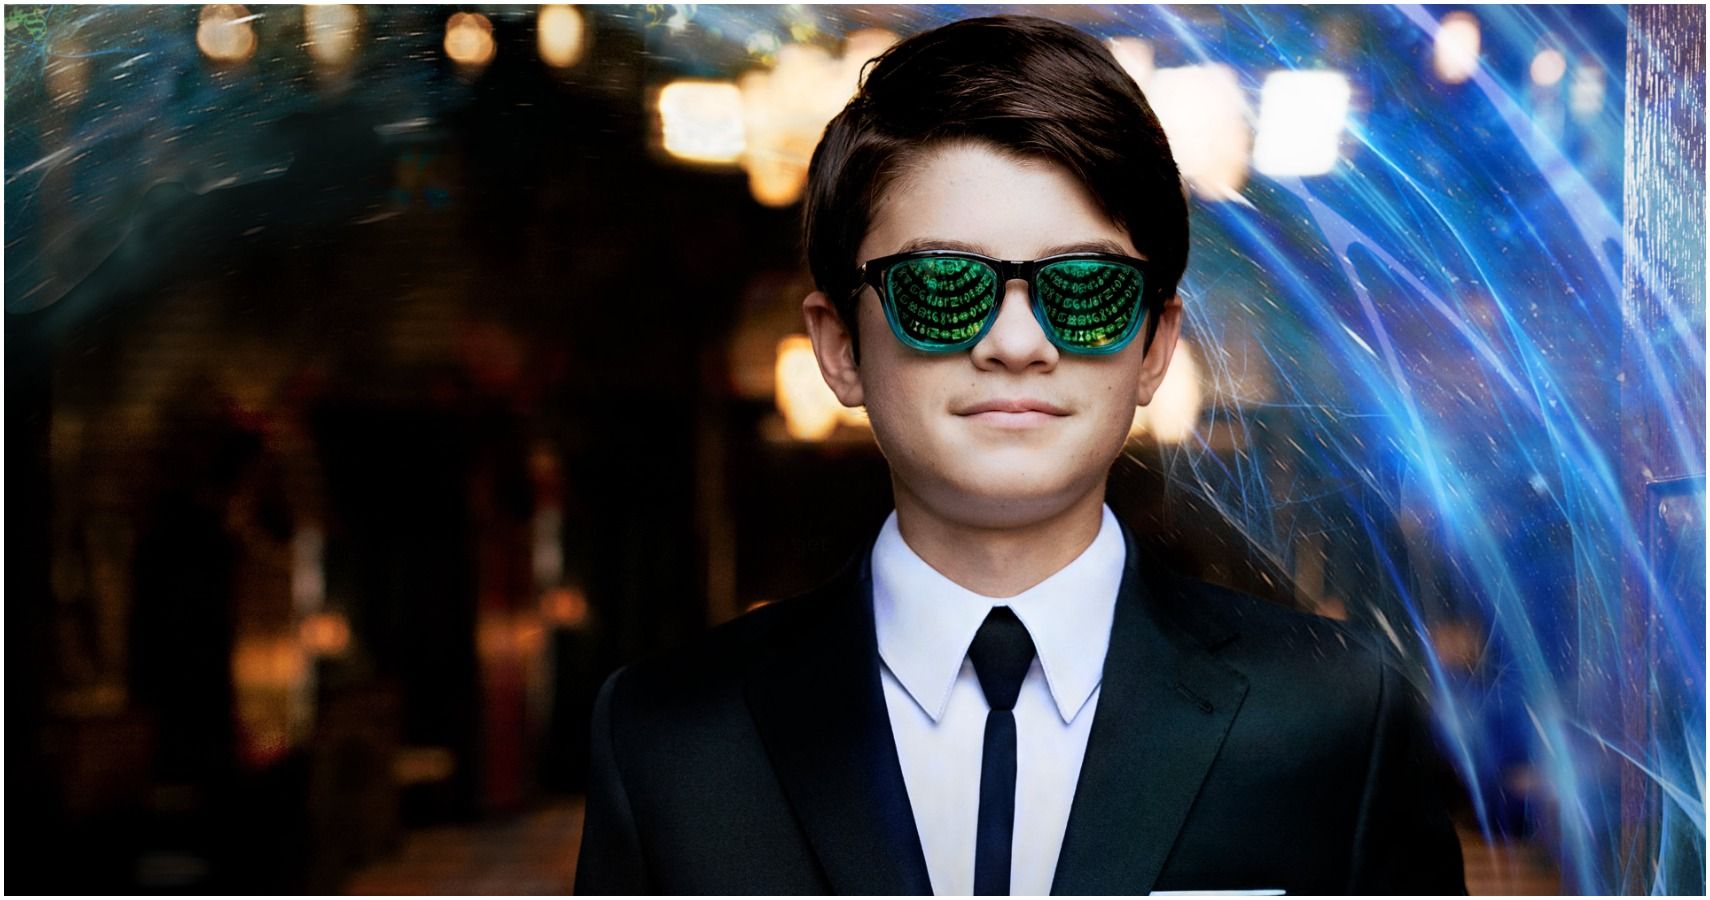 Artemis Fowl 5 Things The Movie Actually Got Right (& 5 Unforgivable Errors)